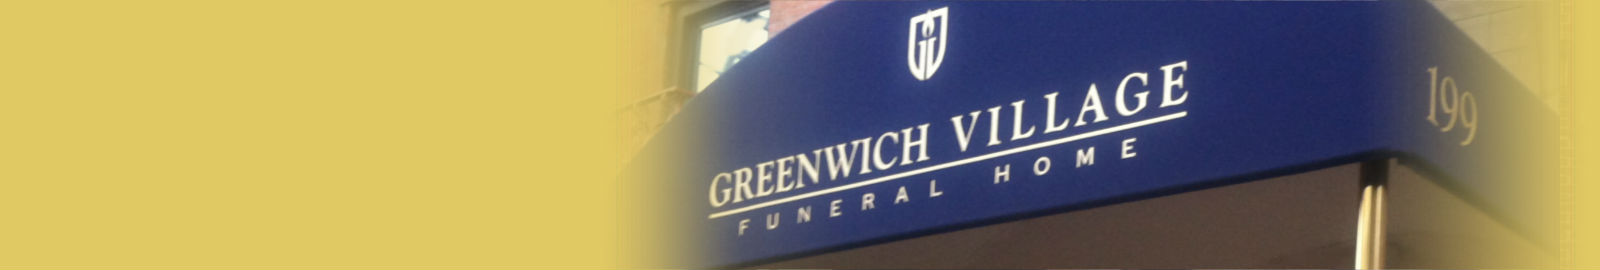 Greenwich Village Funeral Home Awning Photo